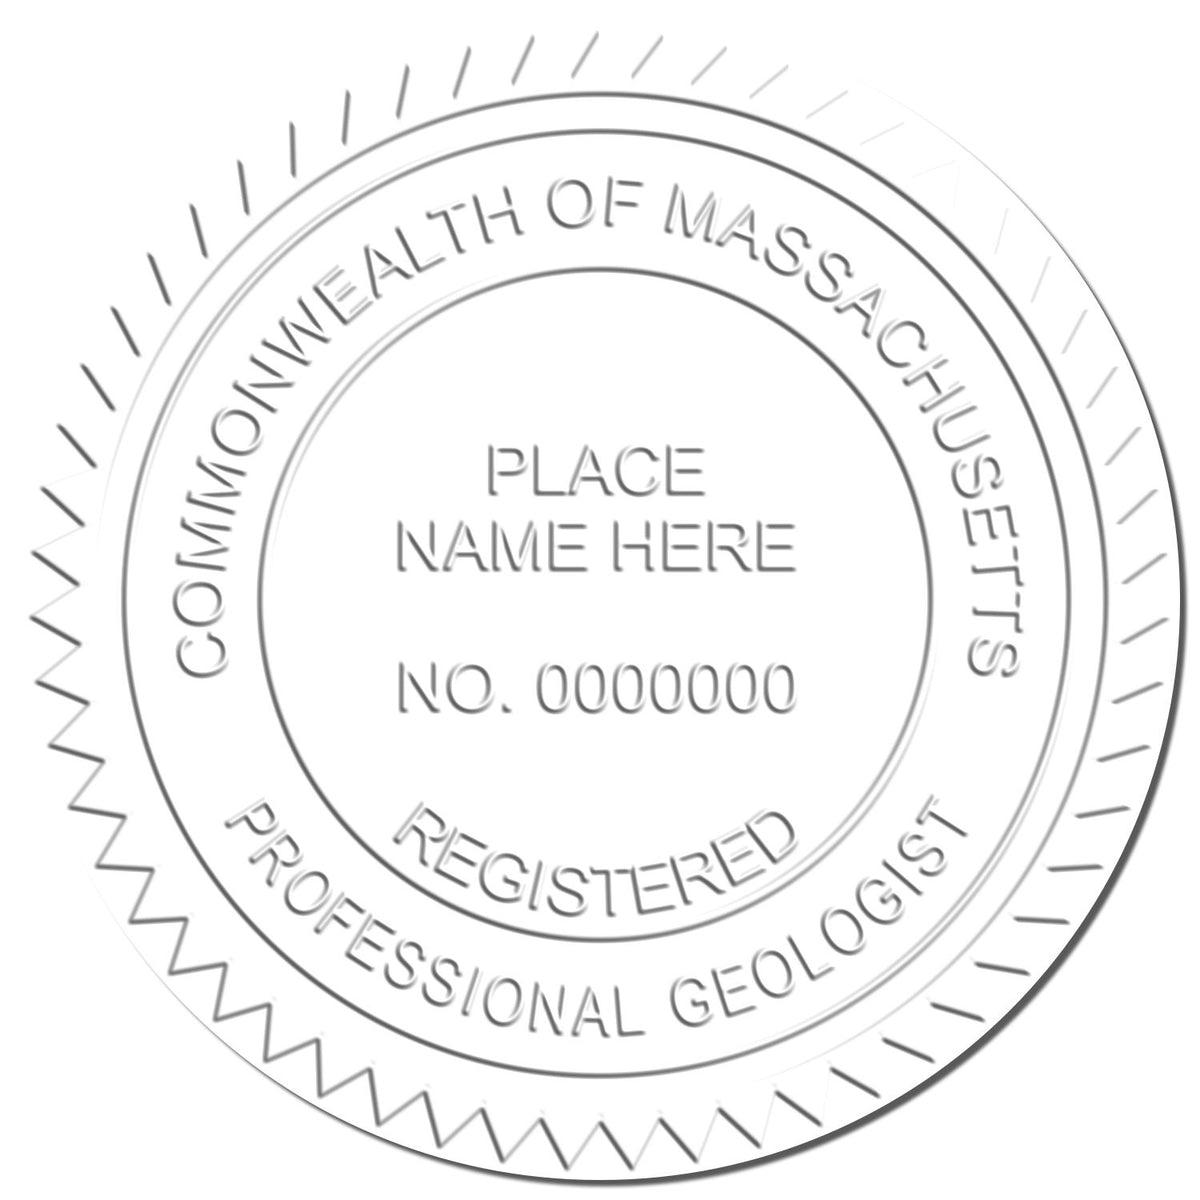 This paper is stamped with a sample imprint of the Handheld Massachusetts Professional Geologist Embosser, signifying its quality and reliability.